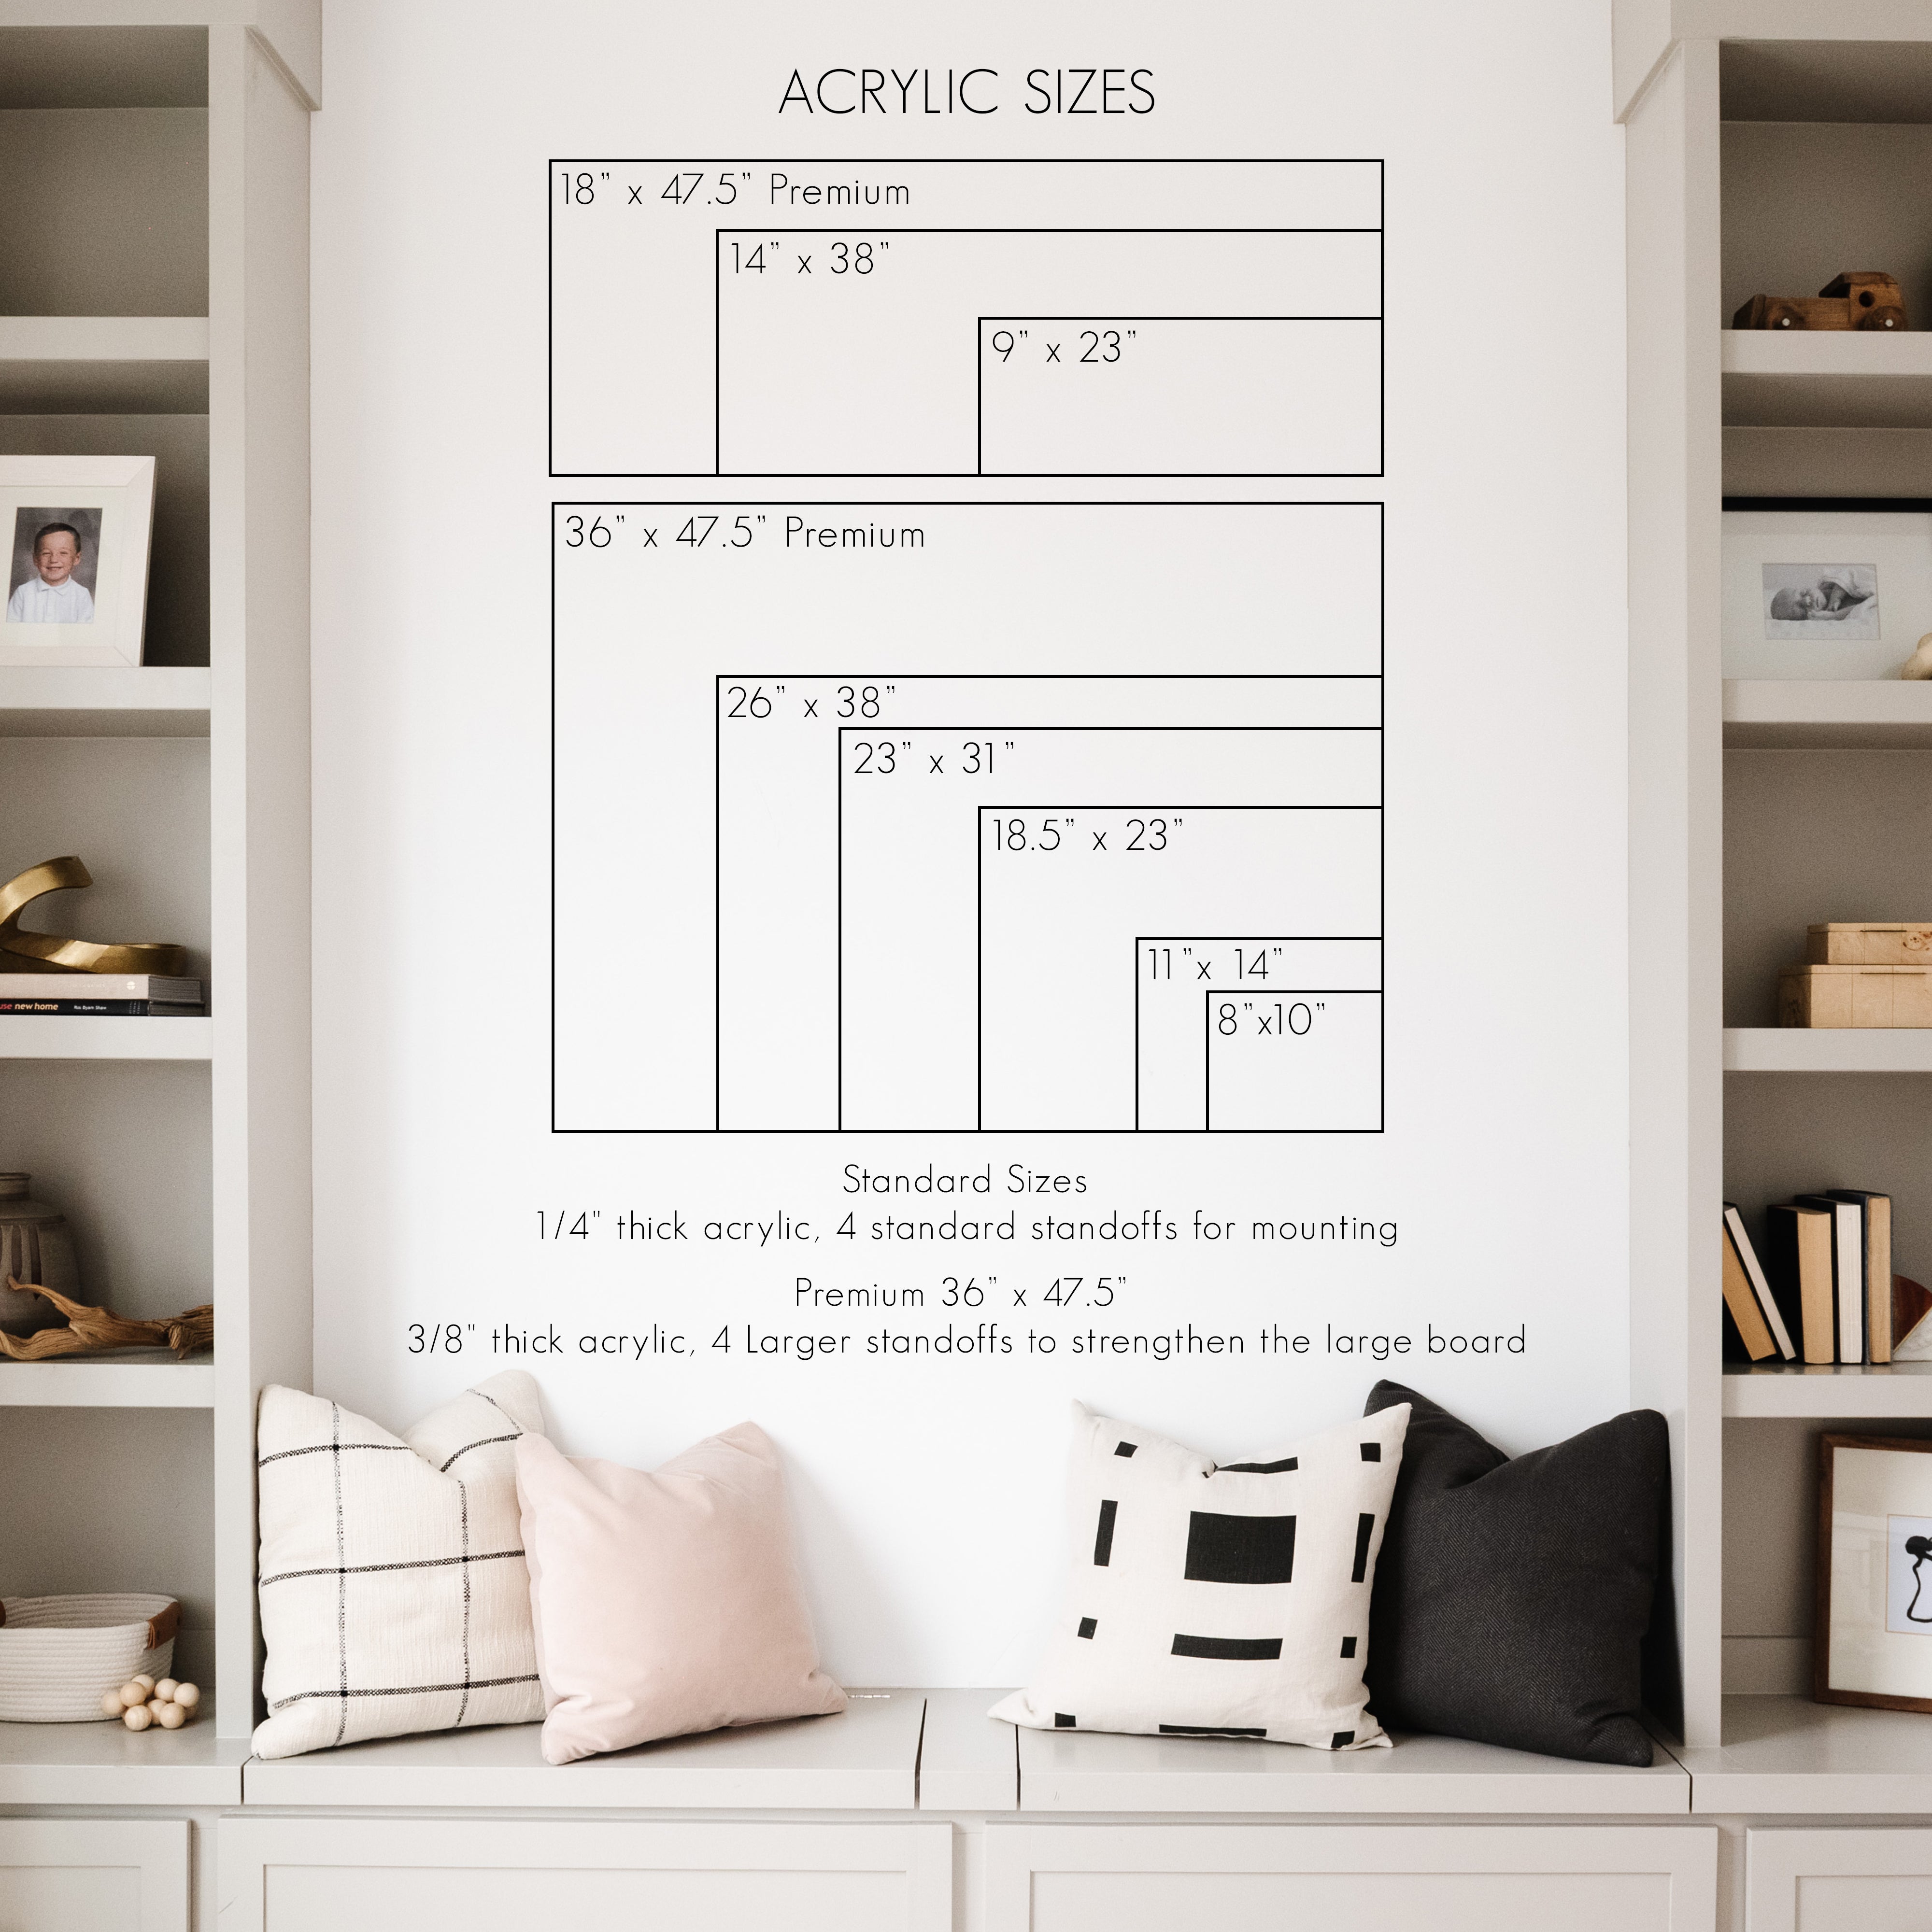 2 Month Frosted Acrylic Calendar + 4 Sections | Horizontal Craig